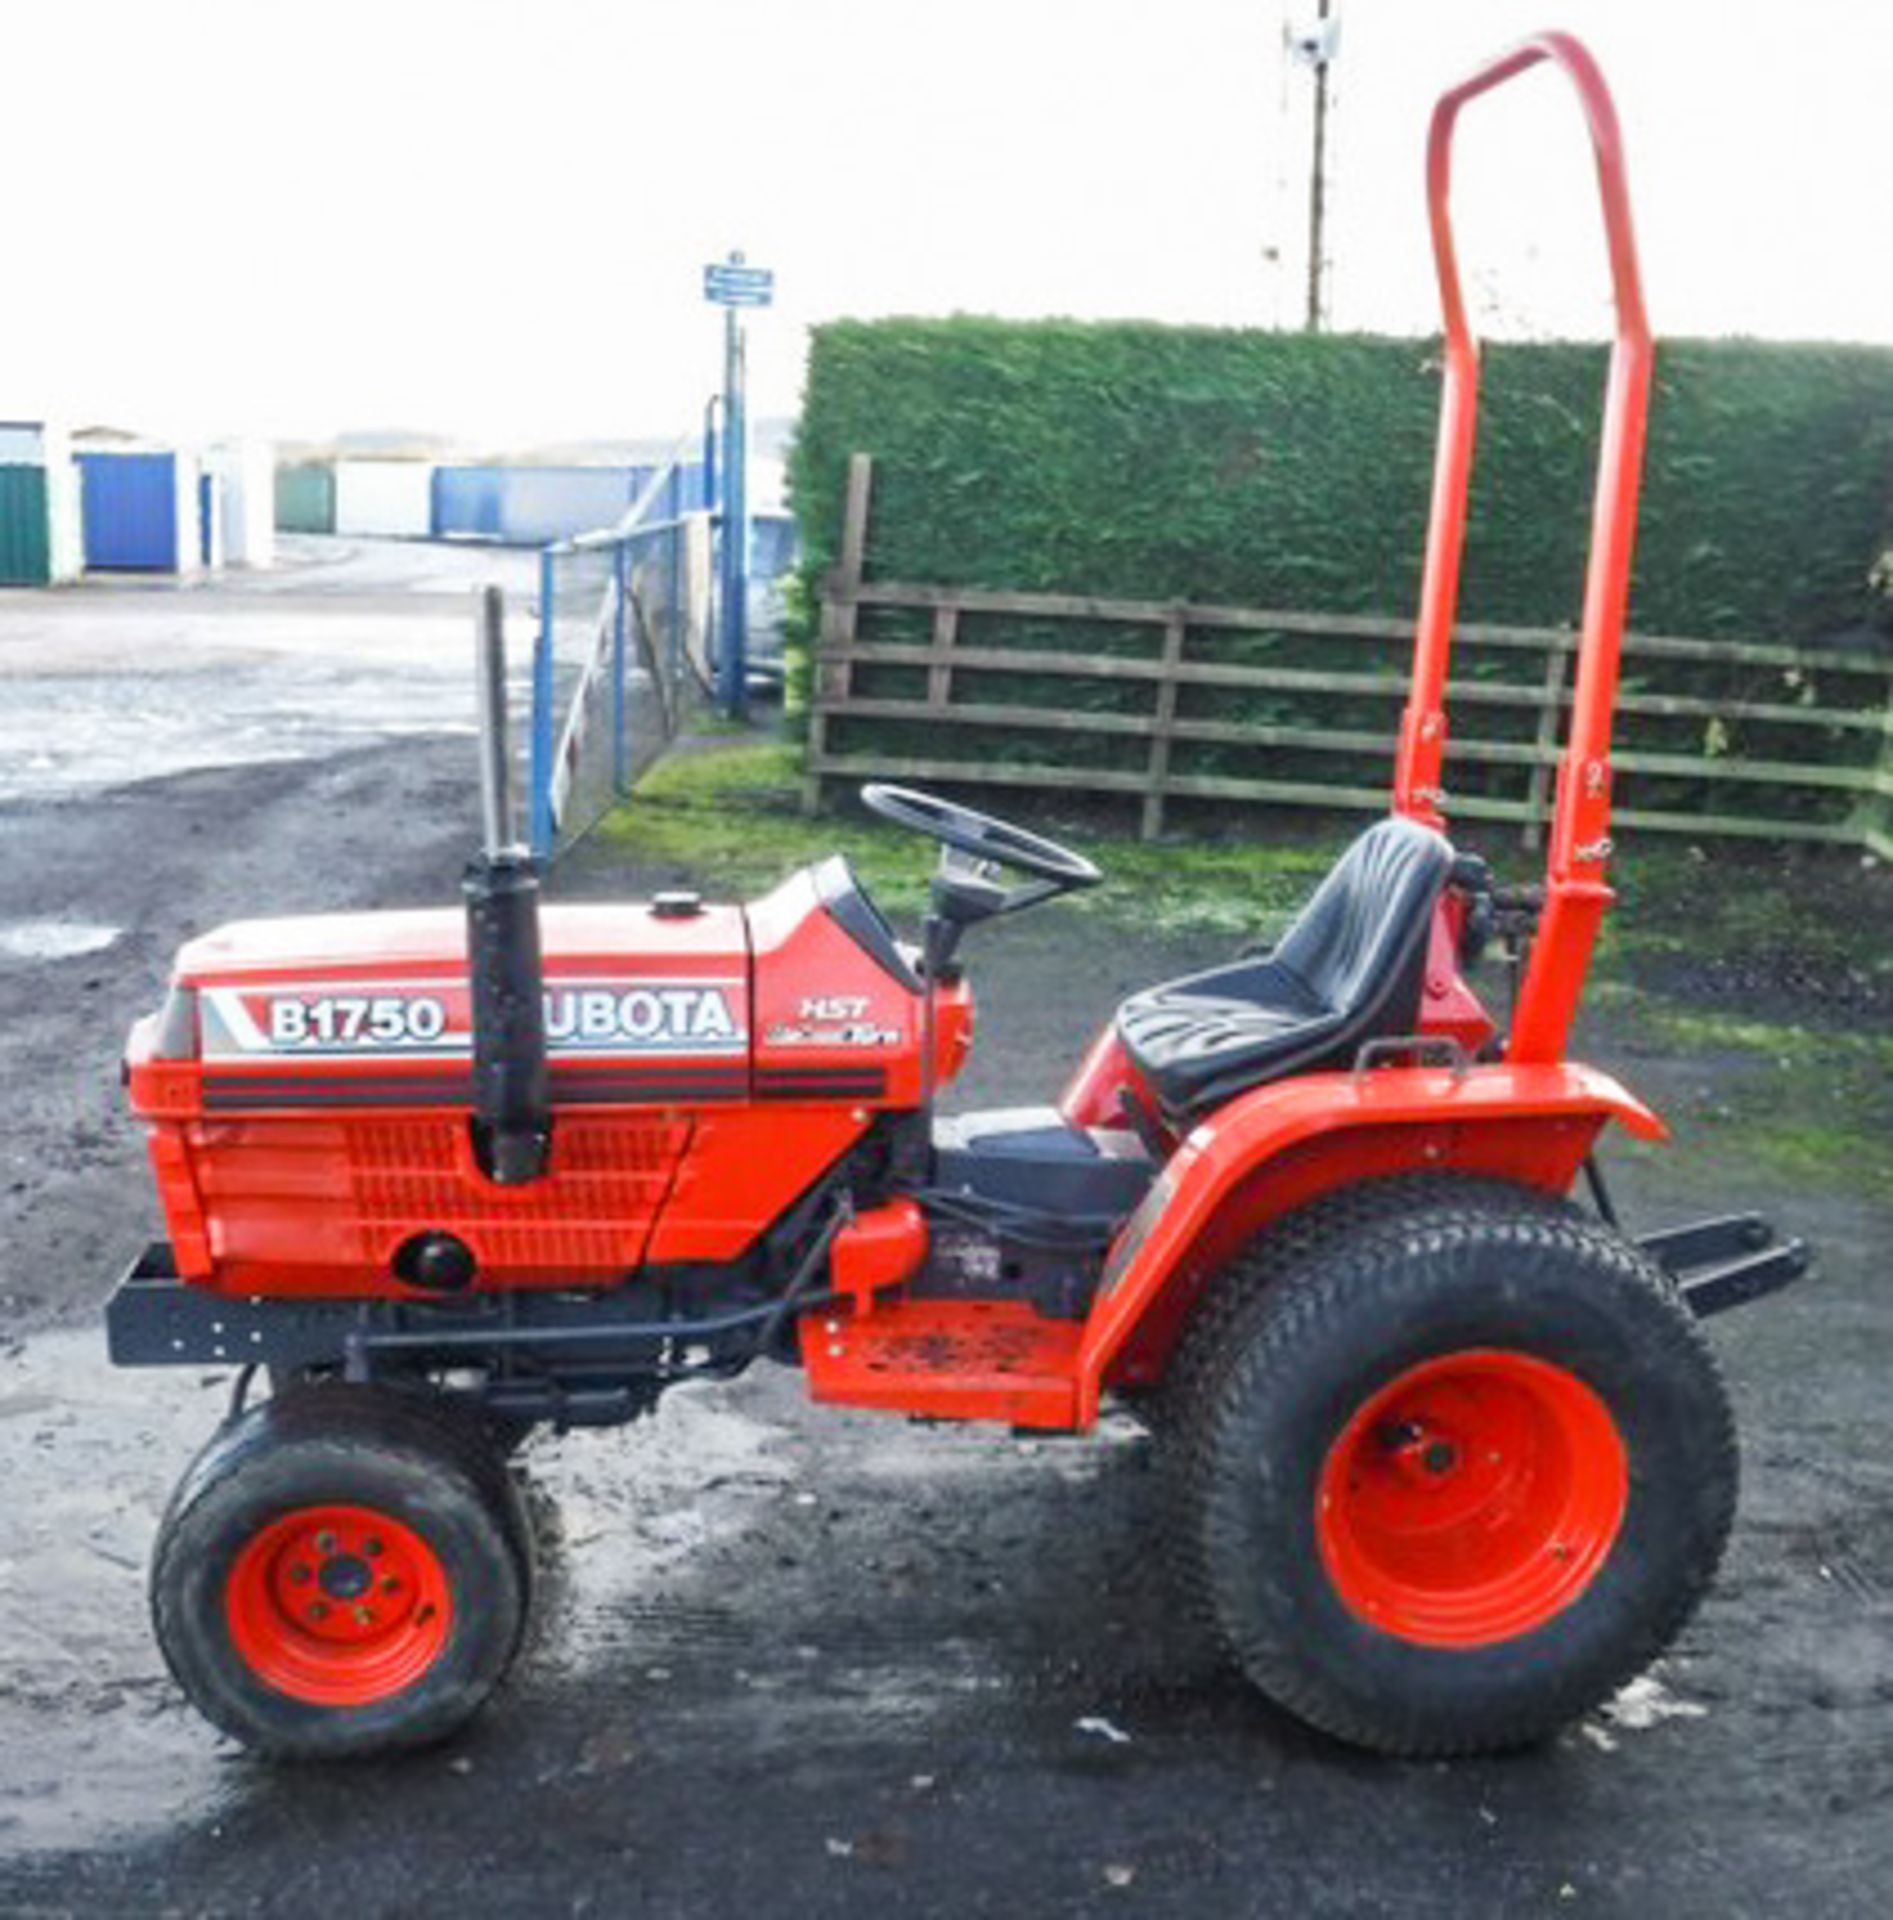 1998 (APPROX) B1750 TRACTOR SN 65435. 20HP 4 WHEEL DRIVE TURF TYRES PTO AND 3 POINT LINKAGE. 665 H - Image 5 of 9